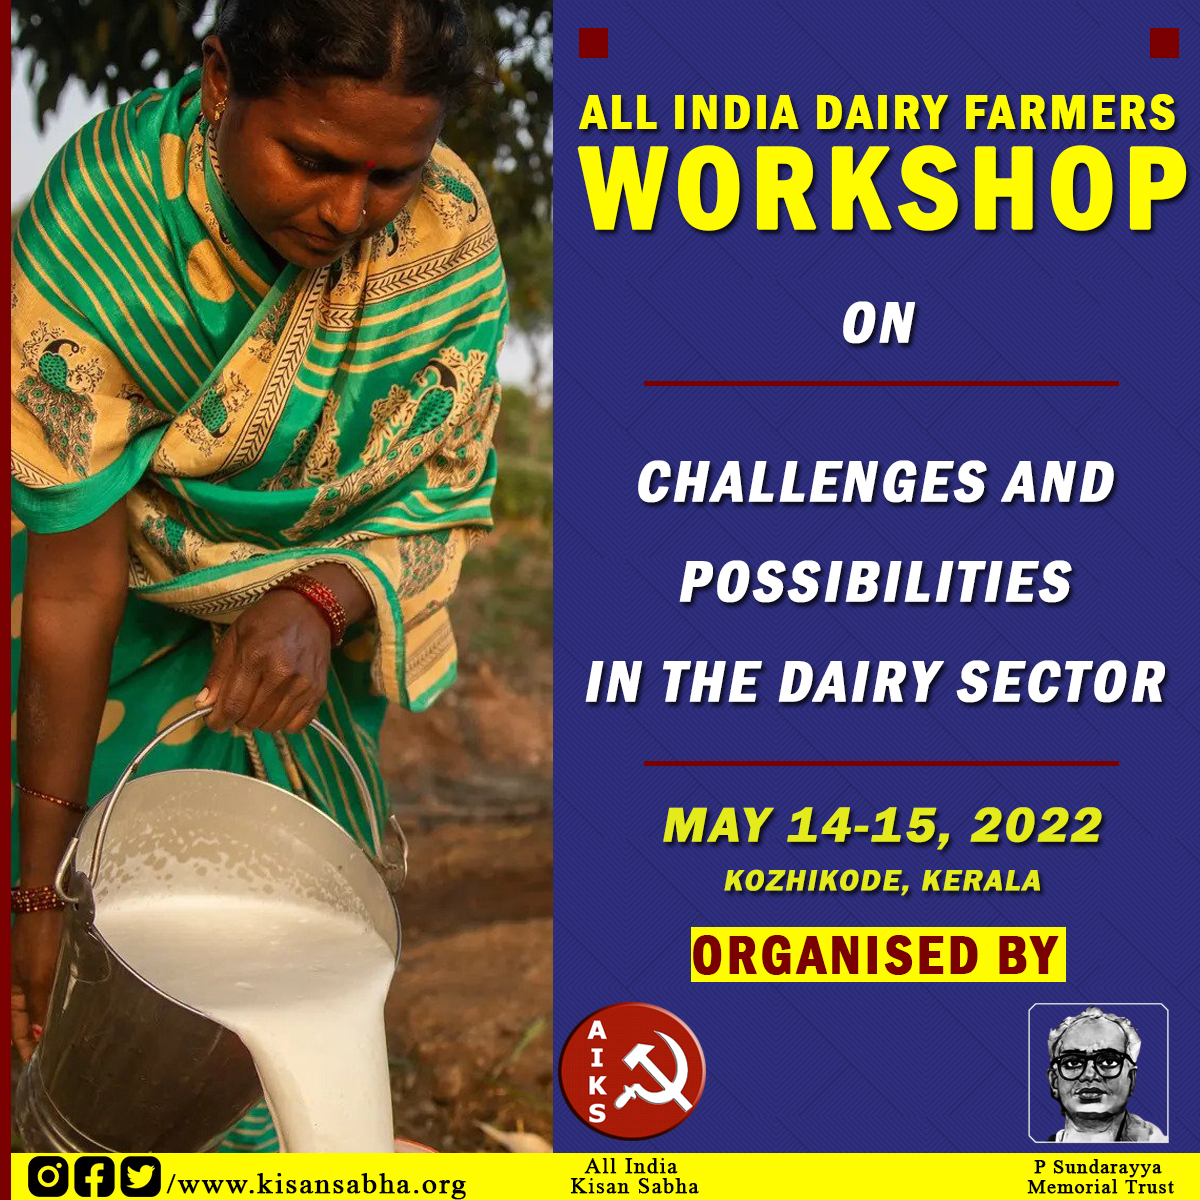 All India Dairy Farmers Workshop, May 14-15, Kozhikode